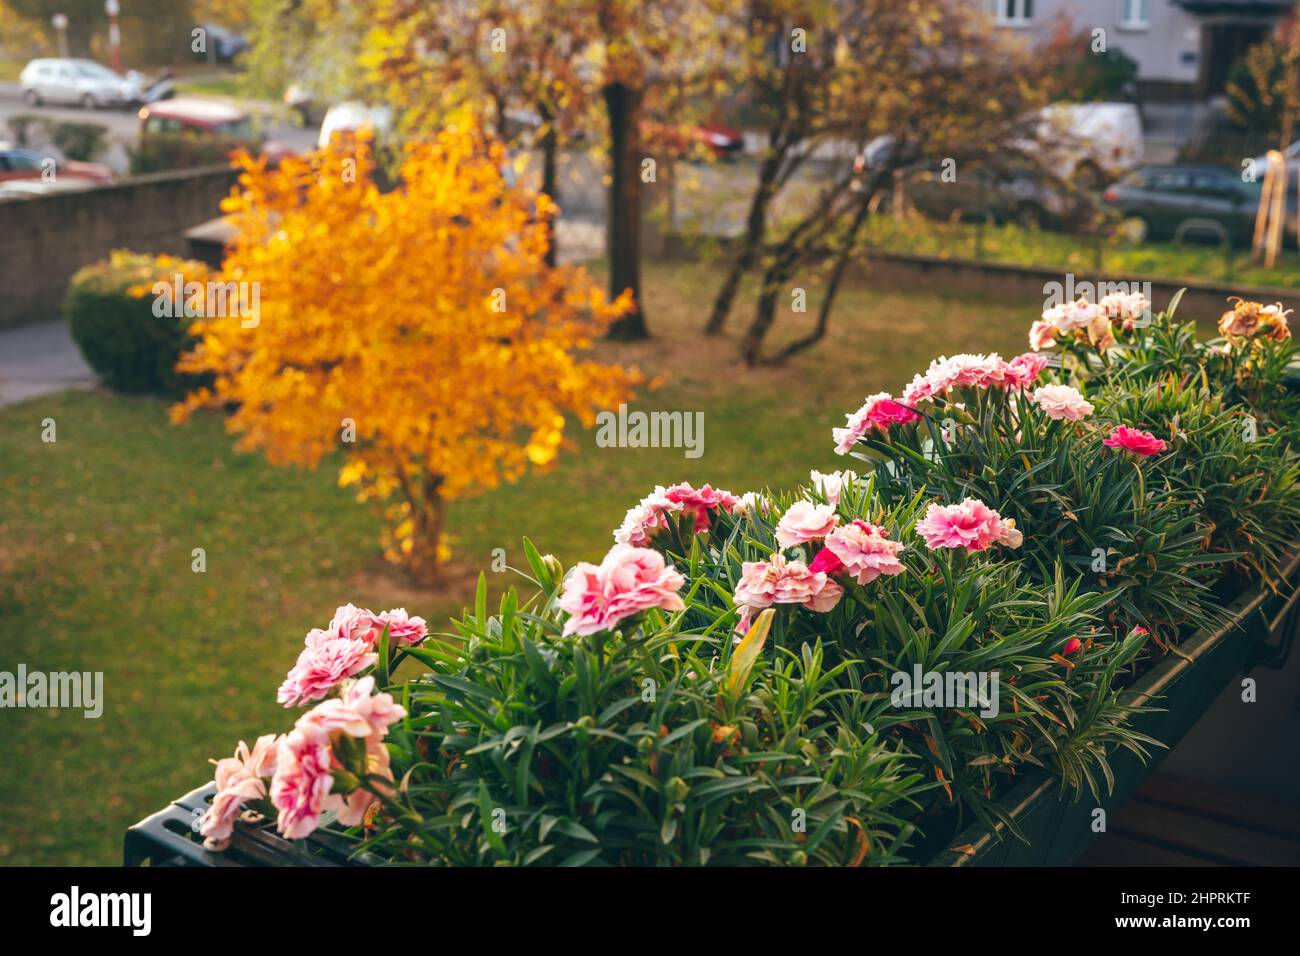 Flowers on the balcony and orange leaves tree in the garden in Autumn. Natural floral background. Autumn season. Gardening Stock Photo